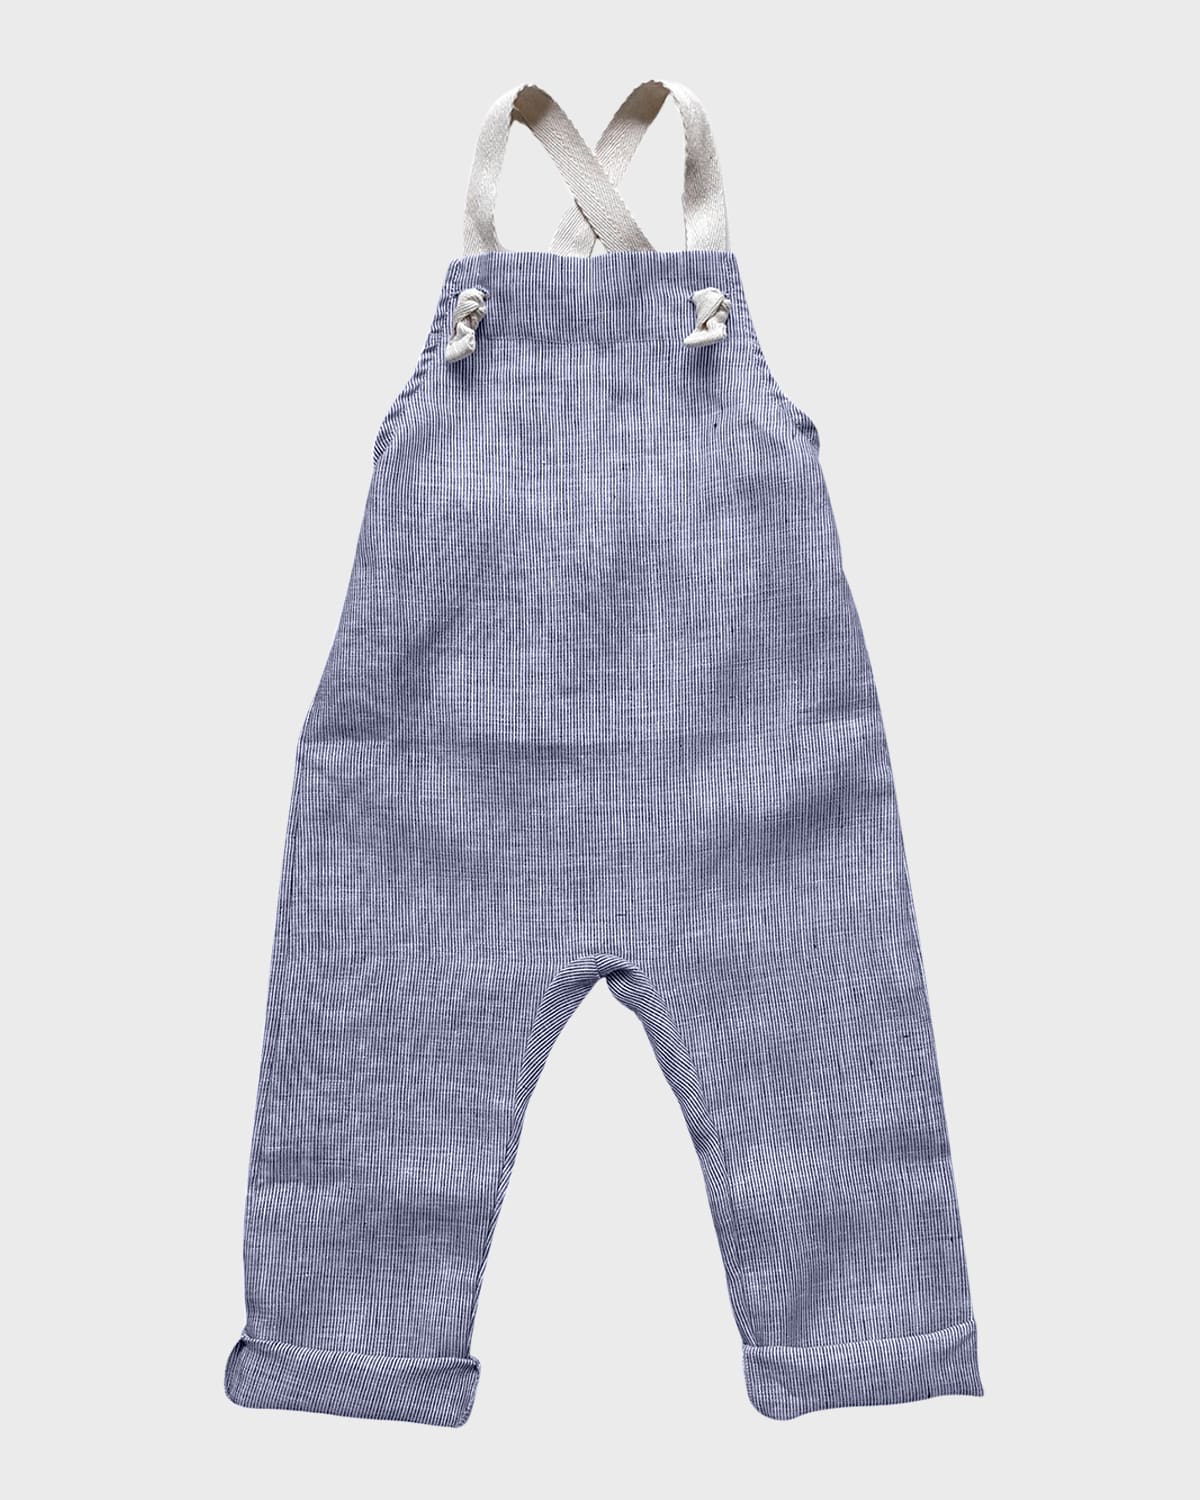 The Simple Folk Kids' Girl's Organic Linen Dungarees In French Stripe